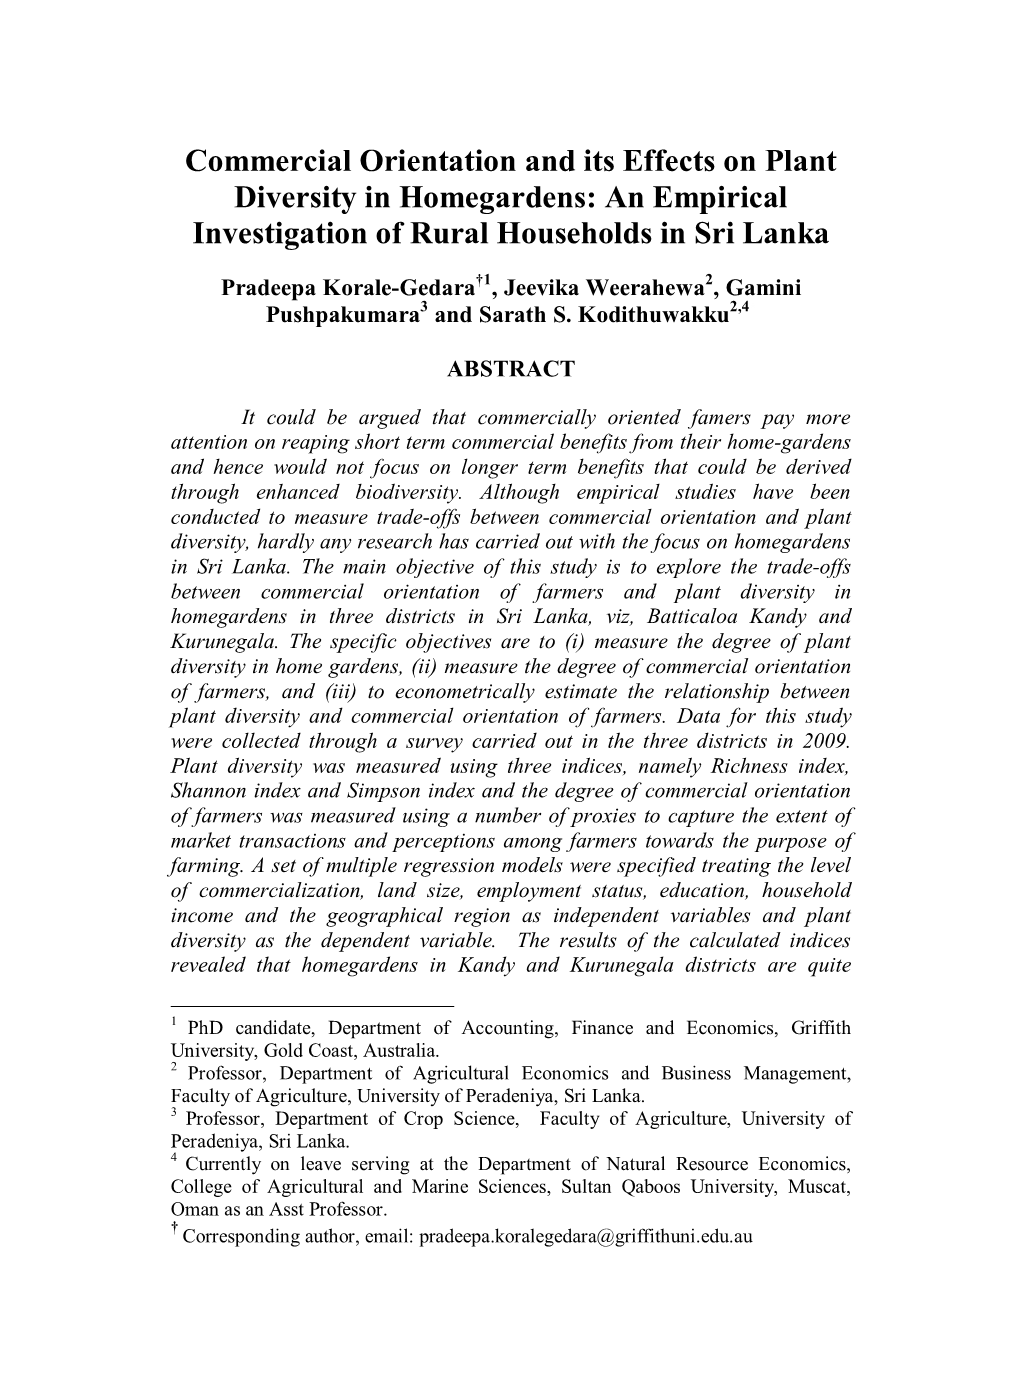 Commercial Orientation and Its Effects on Plant Diversity in Homegardens: an Empirical Investigation of Rural Households in Sri Lanka